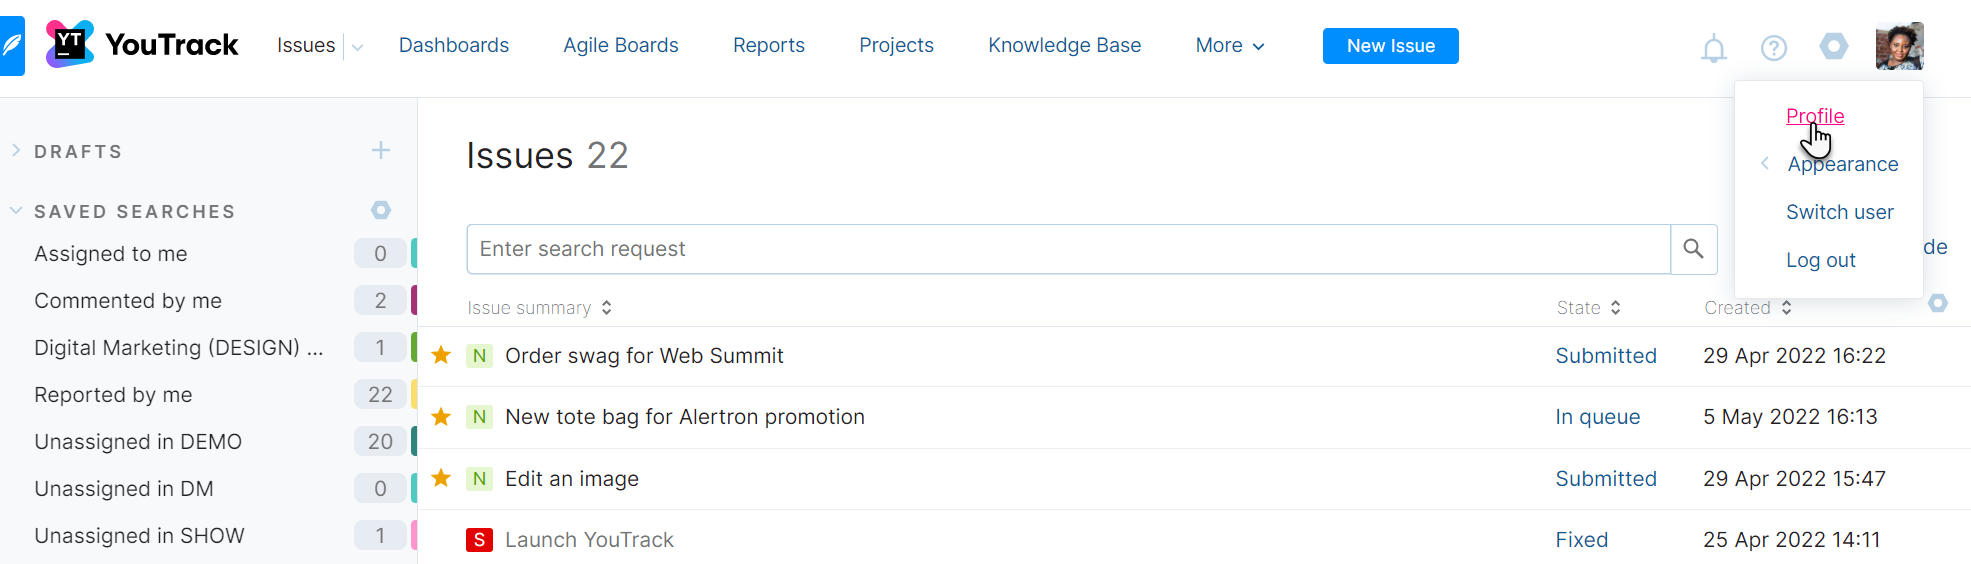 Menu option to open your profile page in YouTrack.